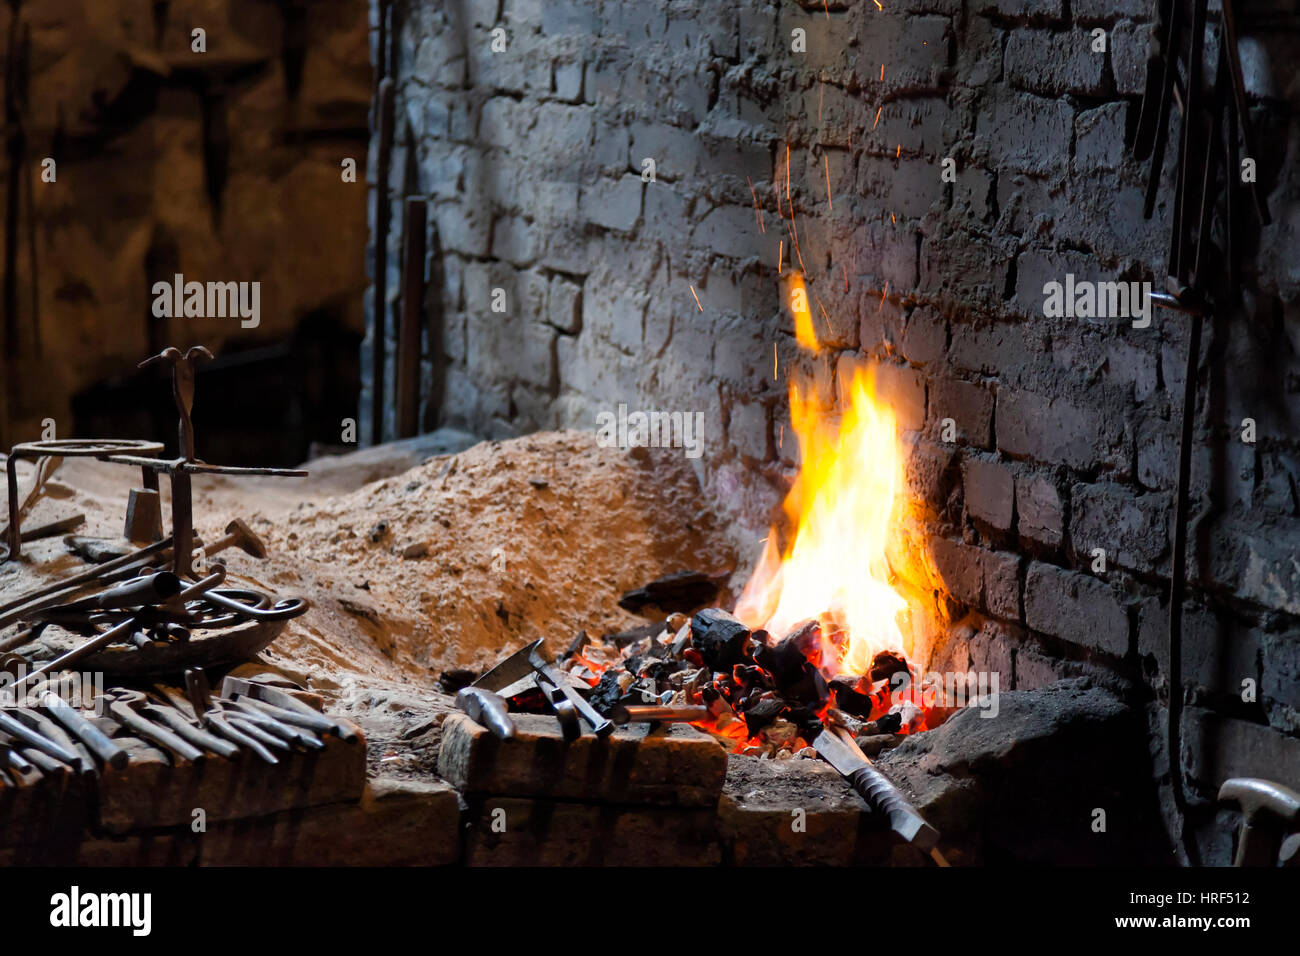 Fireplace in a blacksmith's forge, with some tools Stock Photo